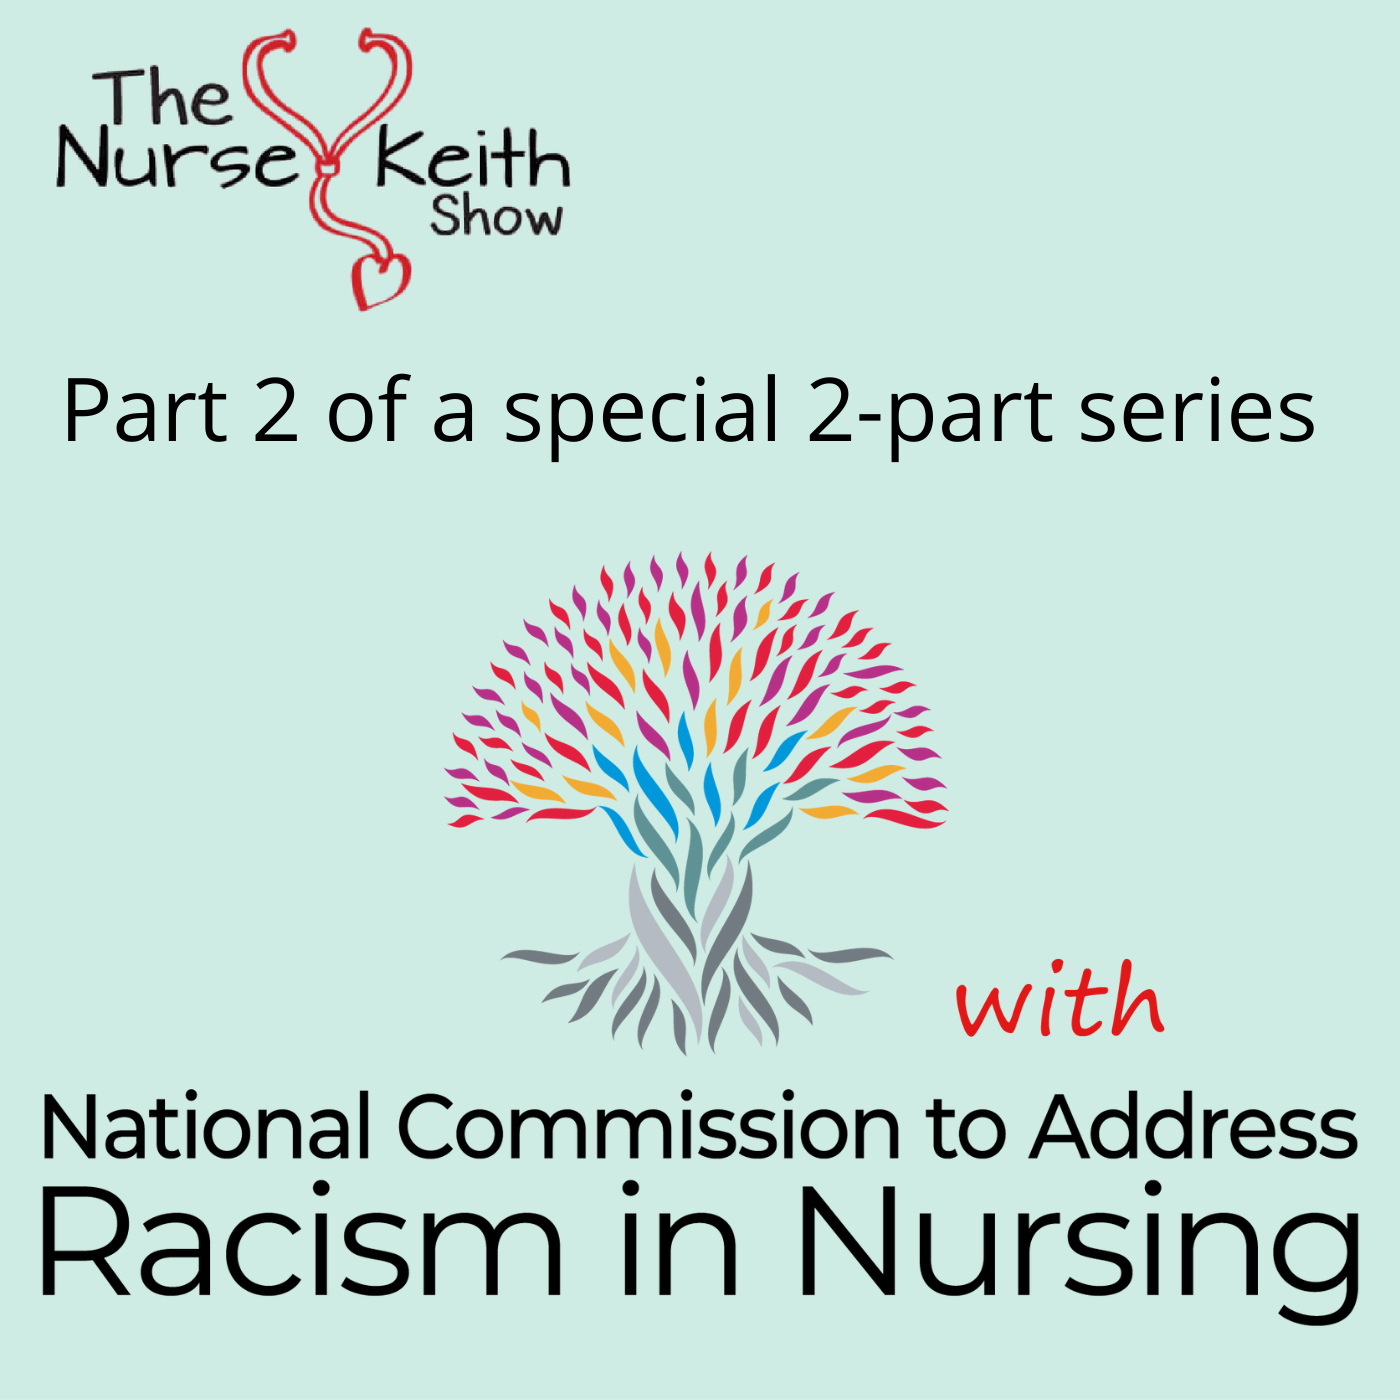 National Commission to Address Racism in Nursing